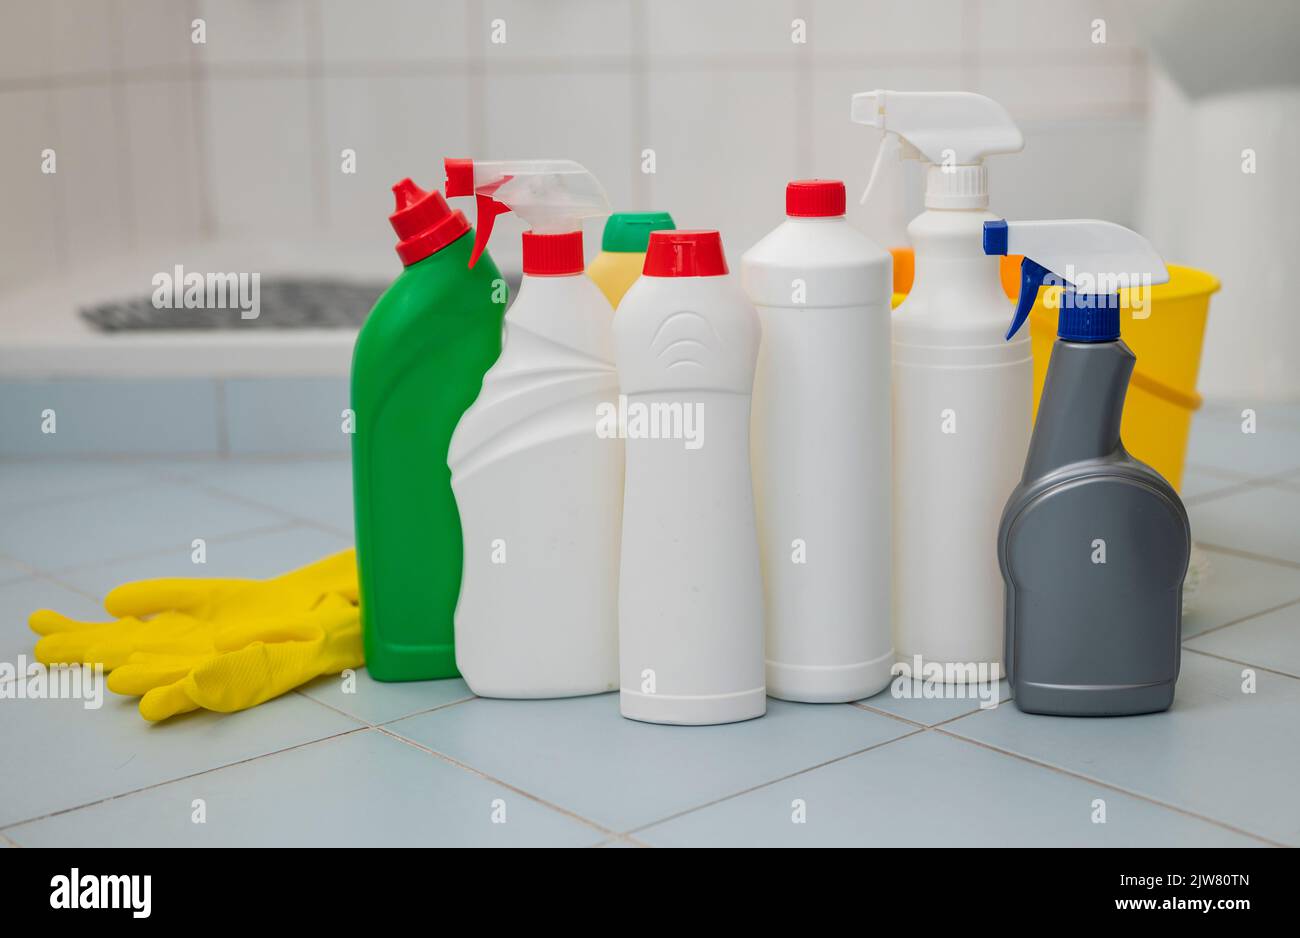 washing disinfectants for cleaning in bottles in the bathroom Stock Photo